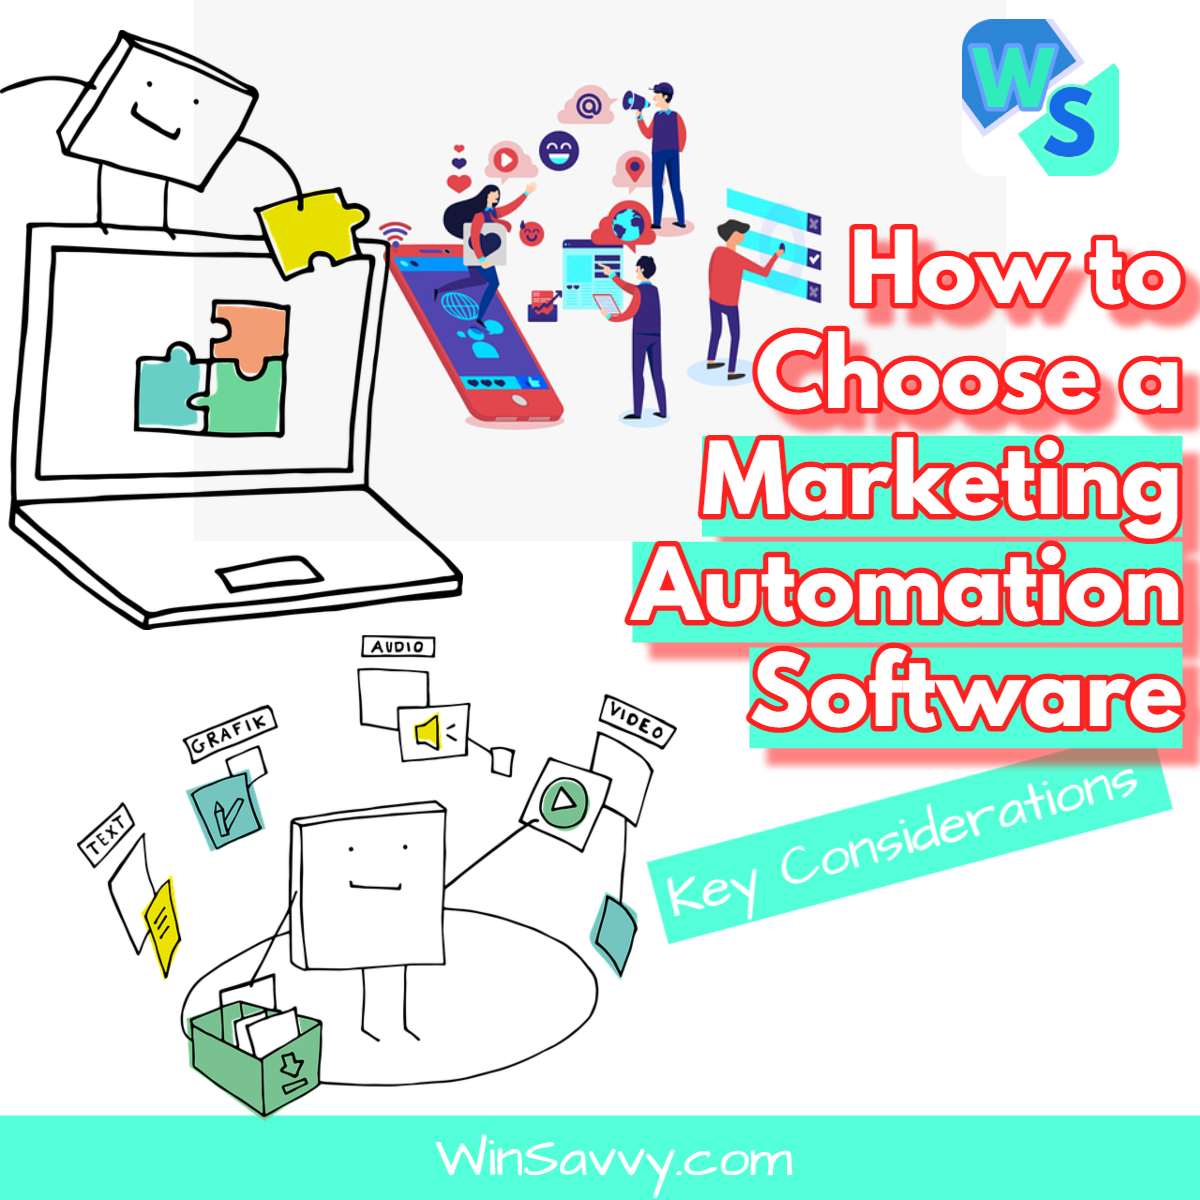 How to choose a marketing automation software - what are the considerations that you should take into account? Tech stack integrations, usability, price, and features are some of the factors to consider when deciding how to automate your marketing.